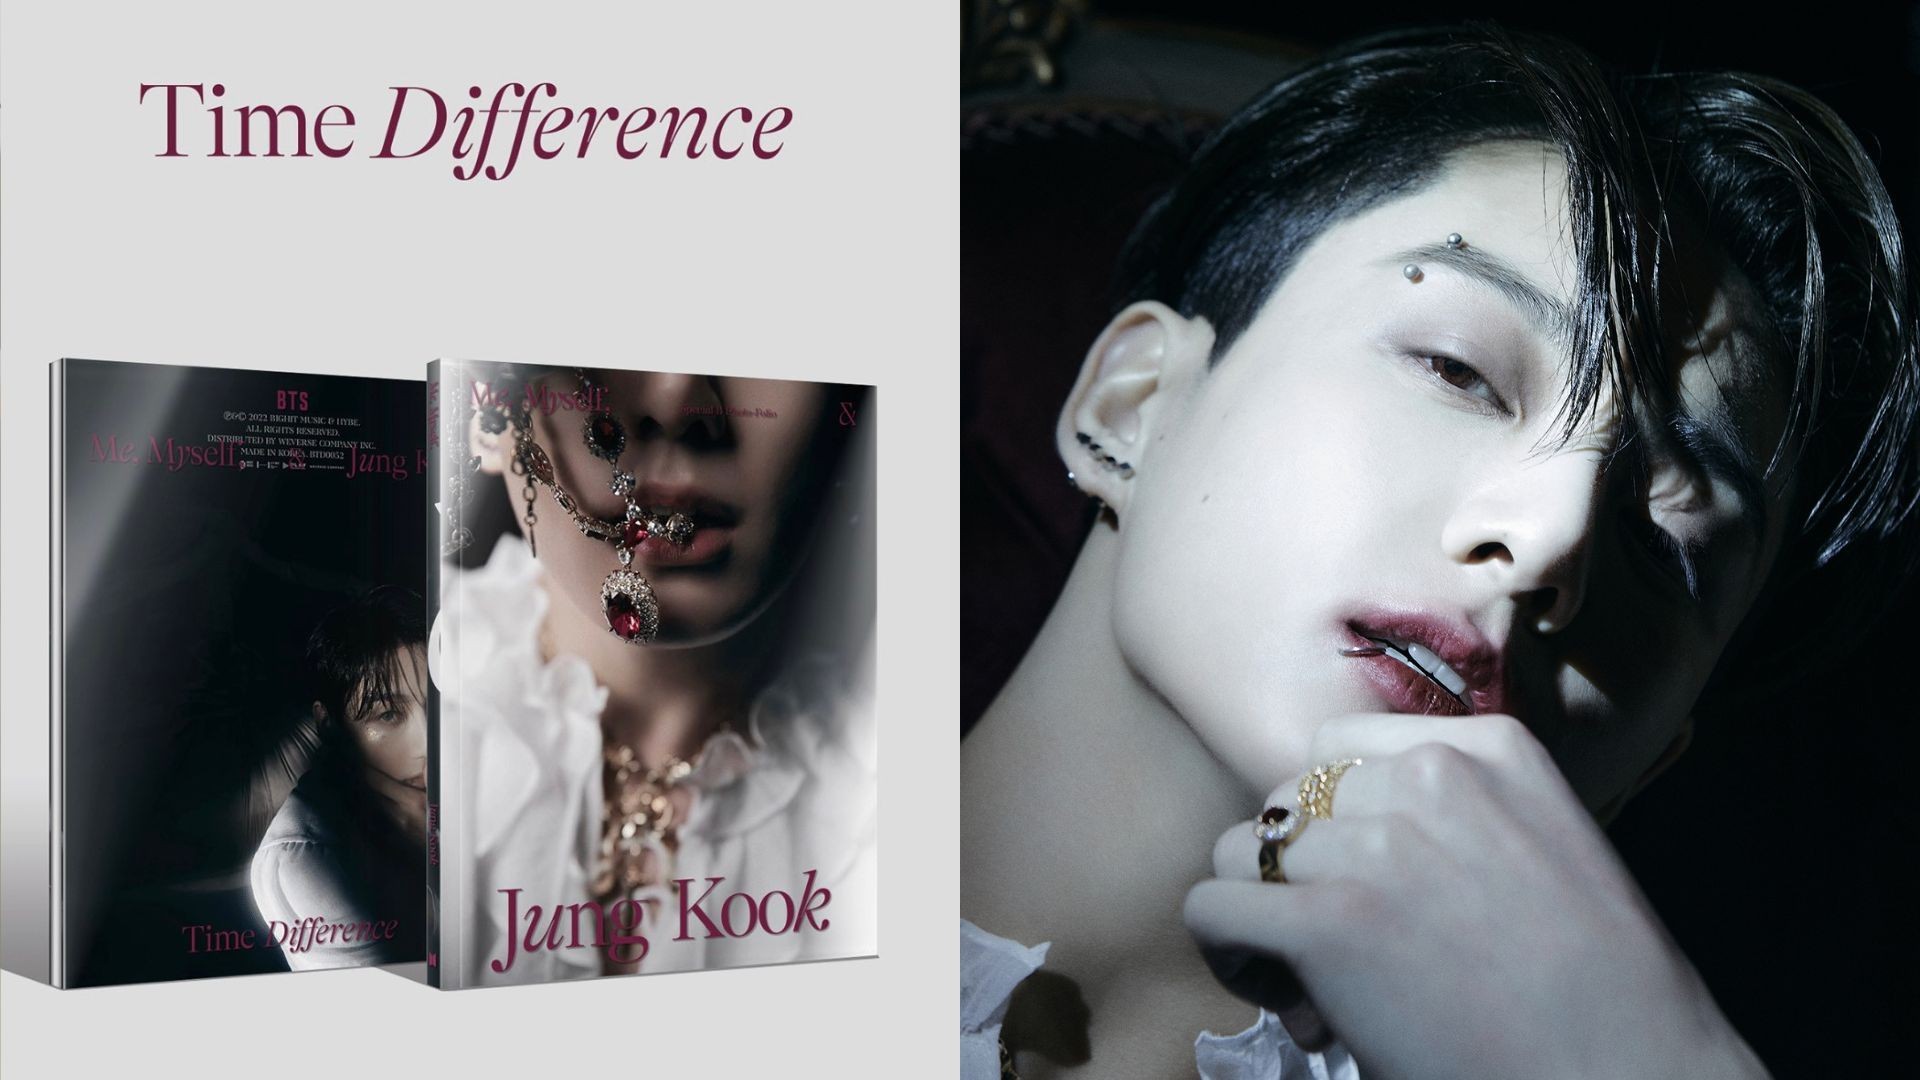 Jung Kook's Time Difference Photo Folio: Where To Buy, Pre Sale Date, And More